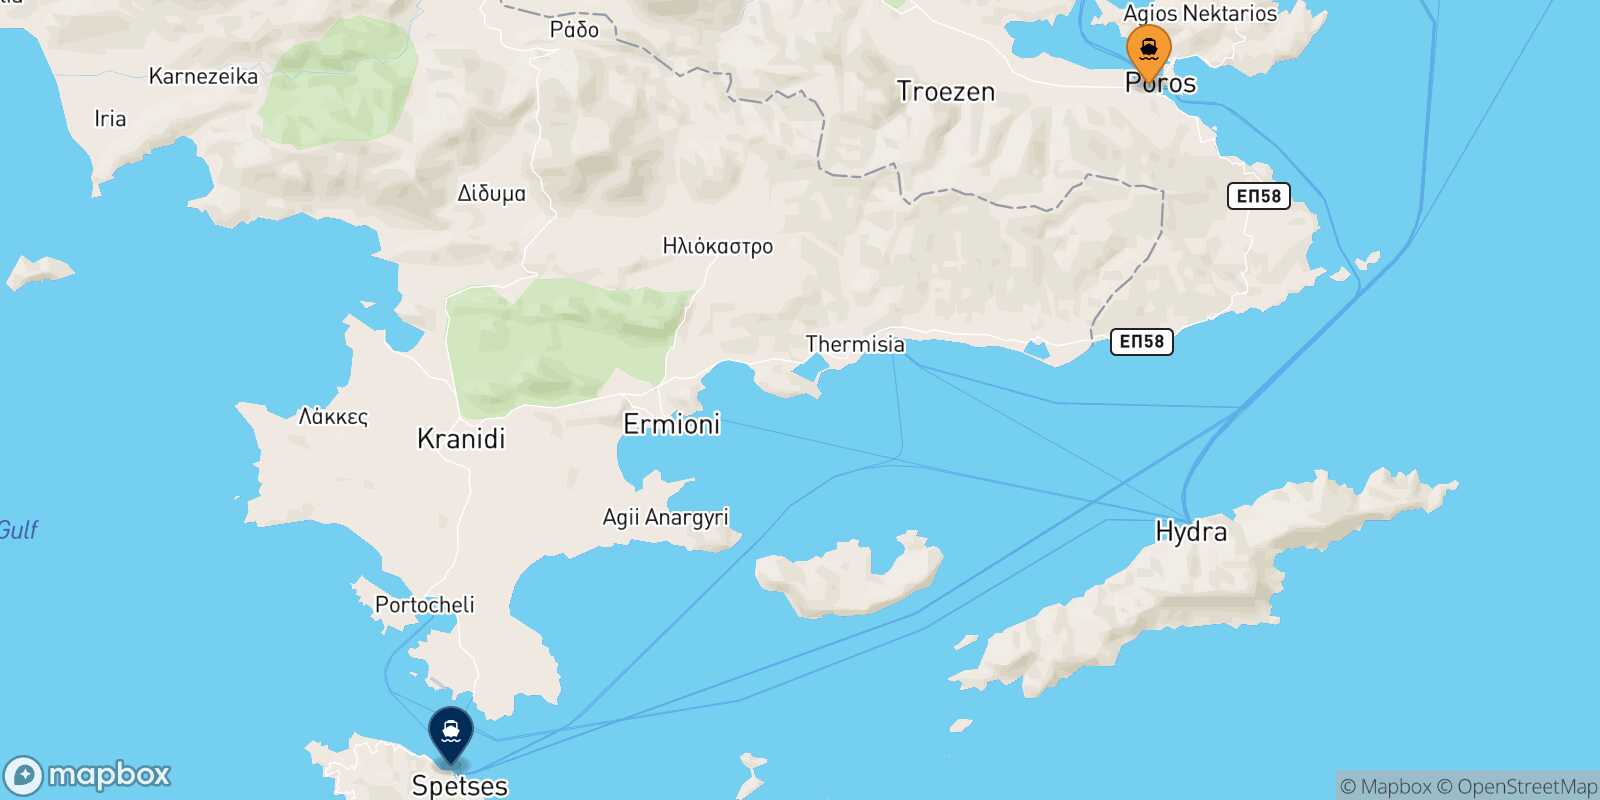 Hydra Spetses route map